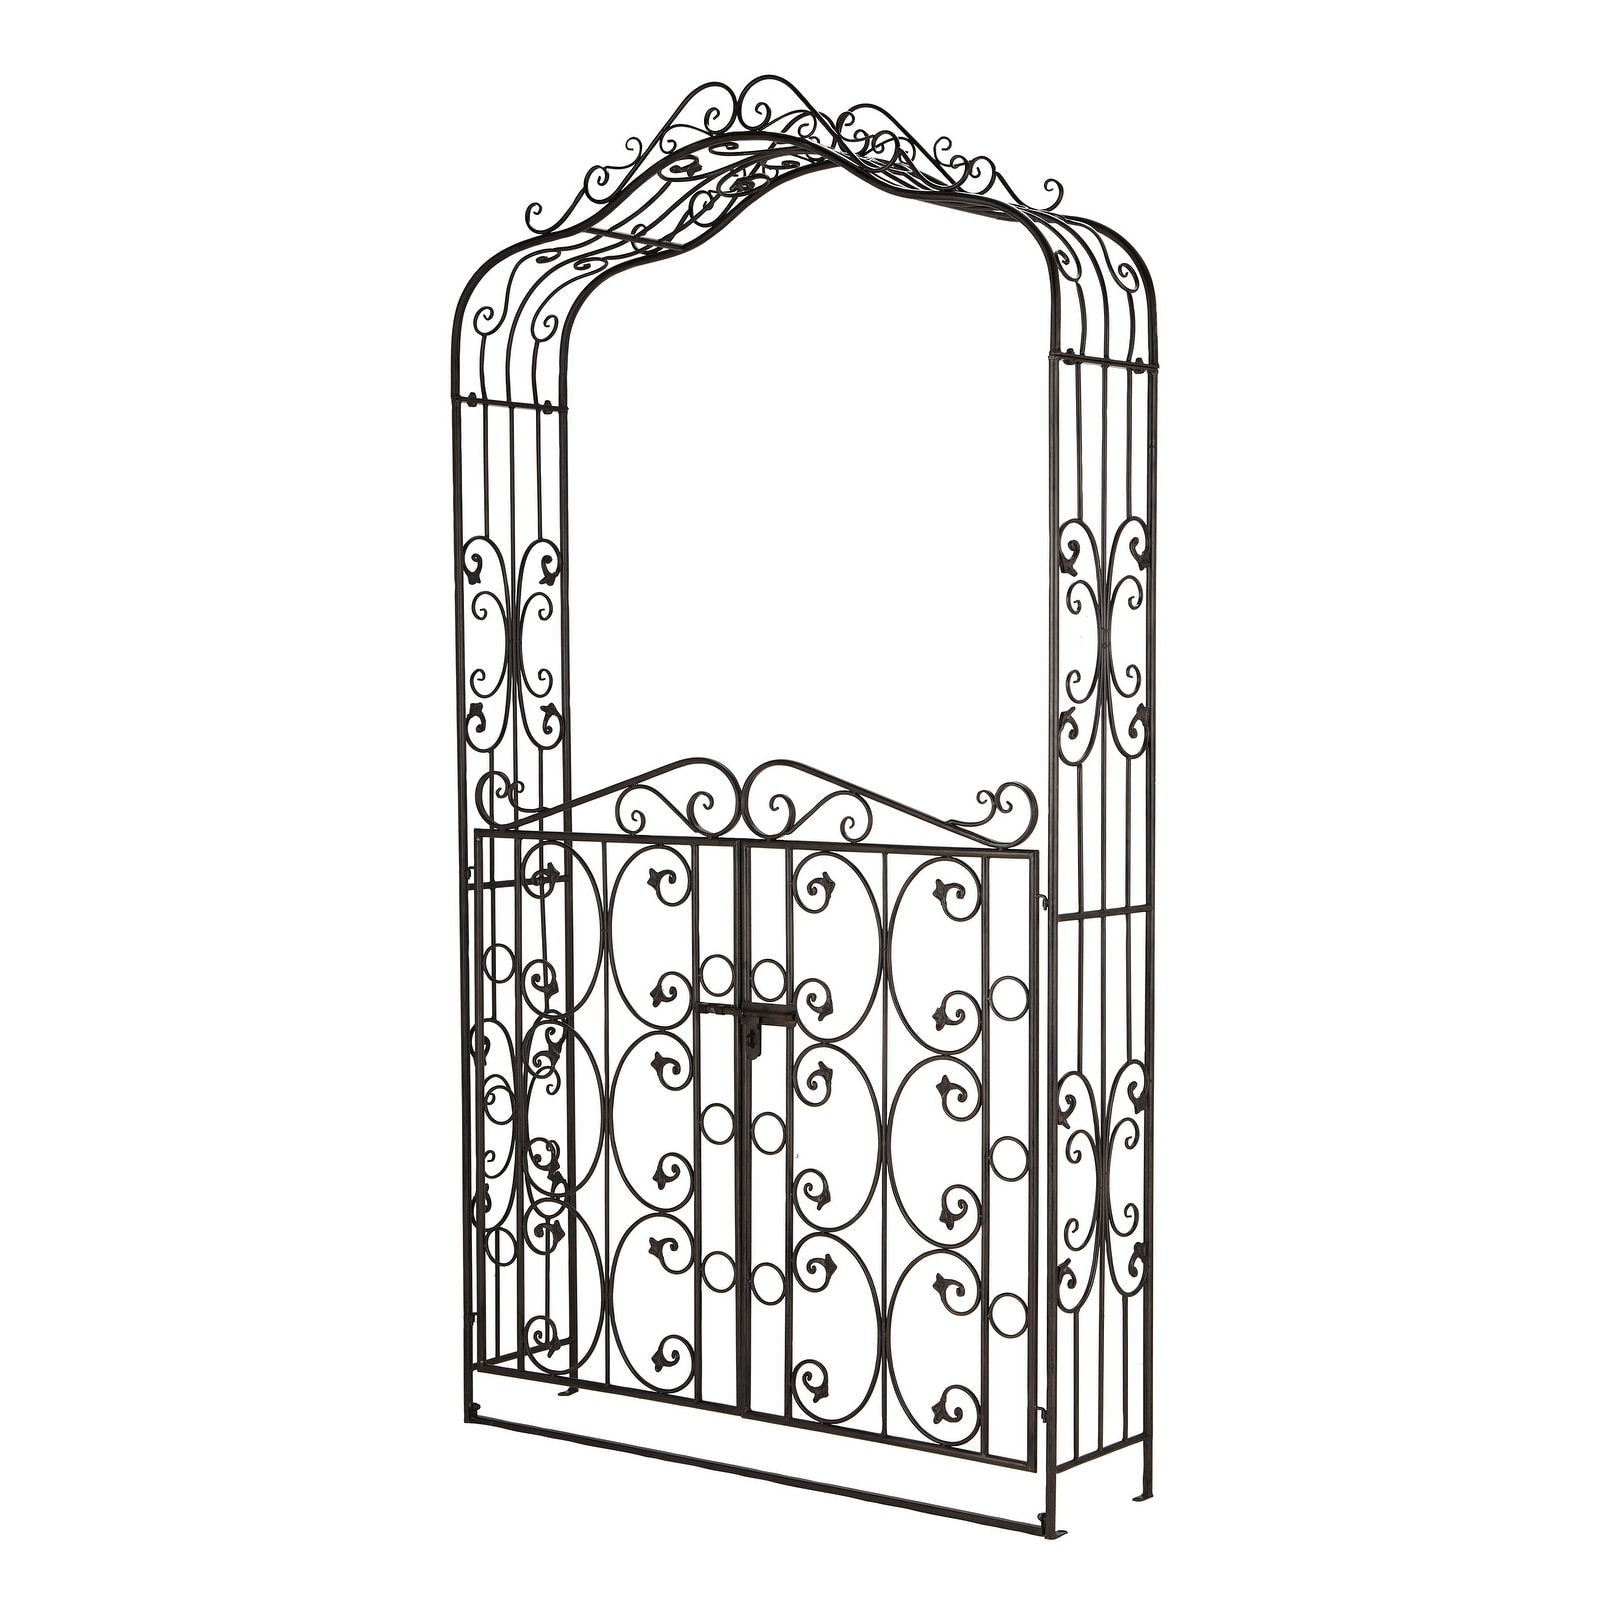 Traditional 94 x 48 Inch Black Iron Scrollwork Garden Gate - come see my Farmhouse French Inspired Courtyard, Inexpensive Bistro Dining Sets & Garden Finds.